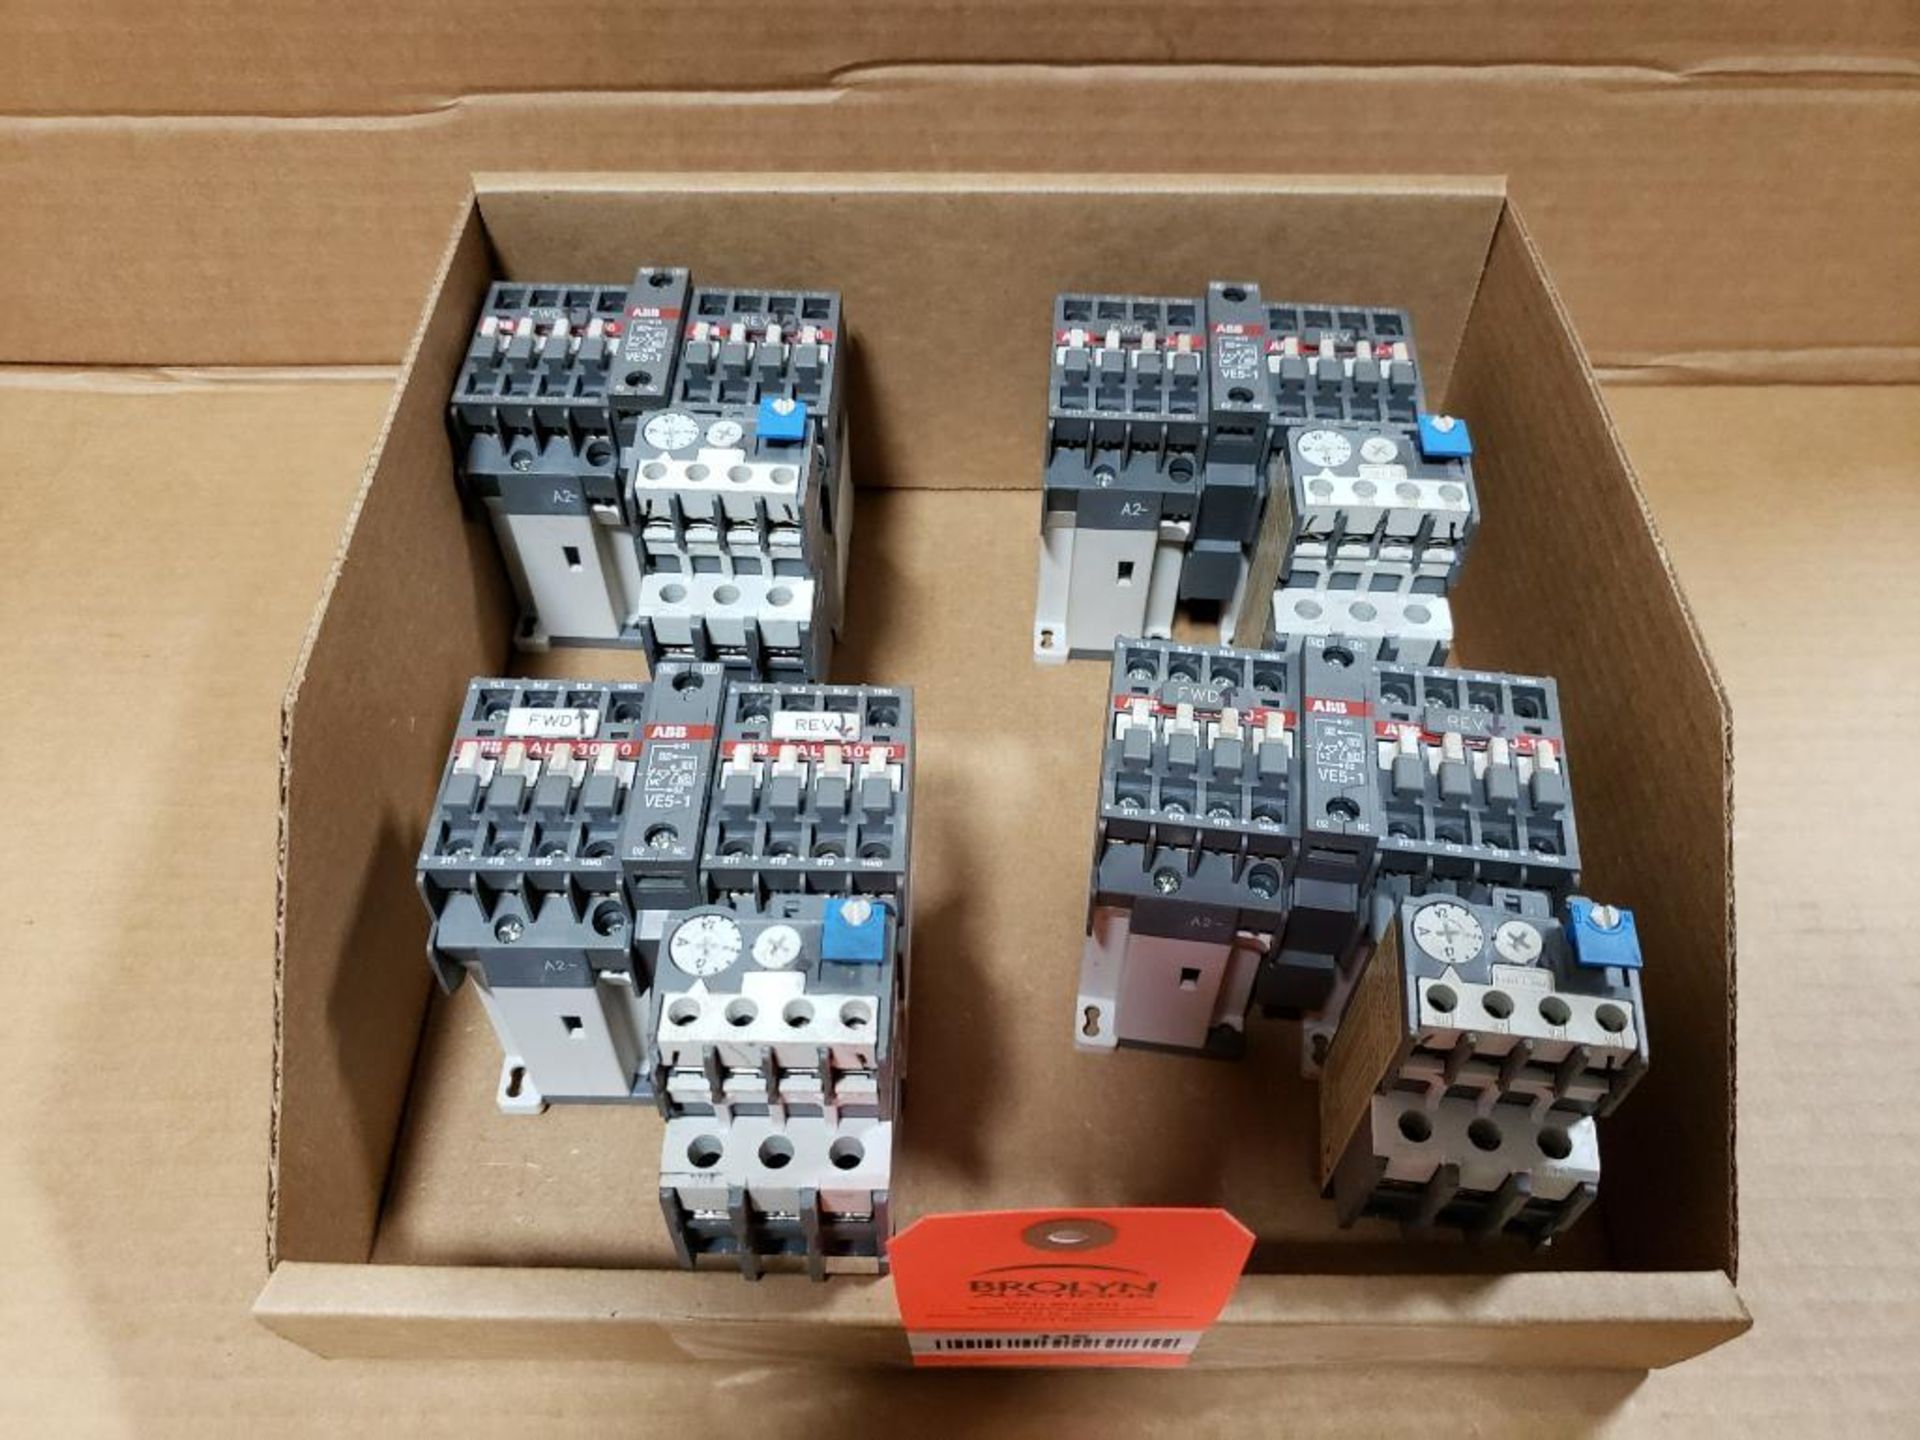 Qty 4 - ABB AL9 contactor and relay assembly.